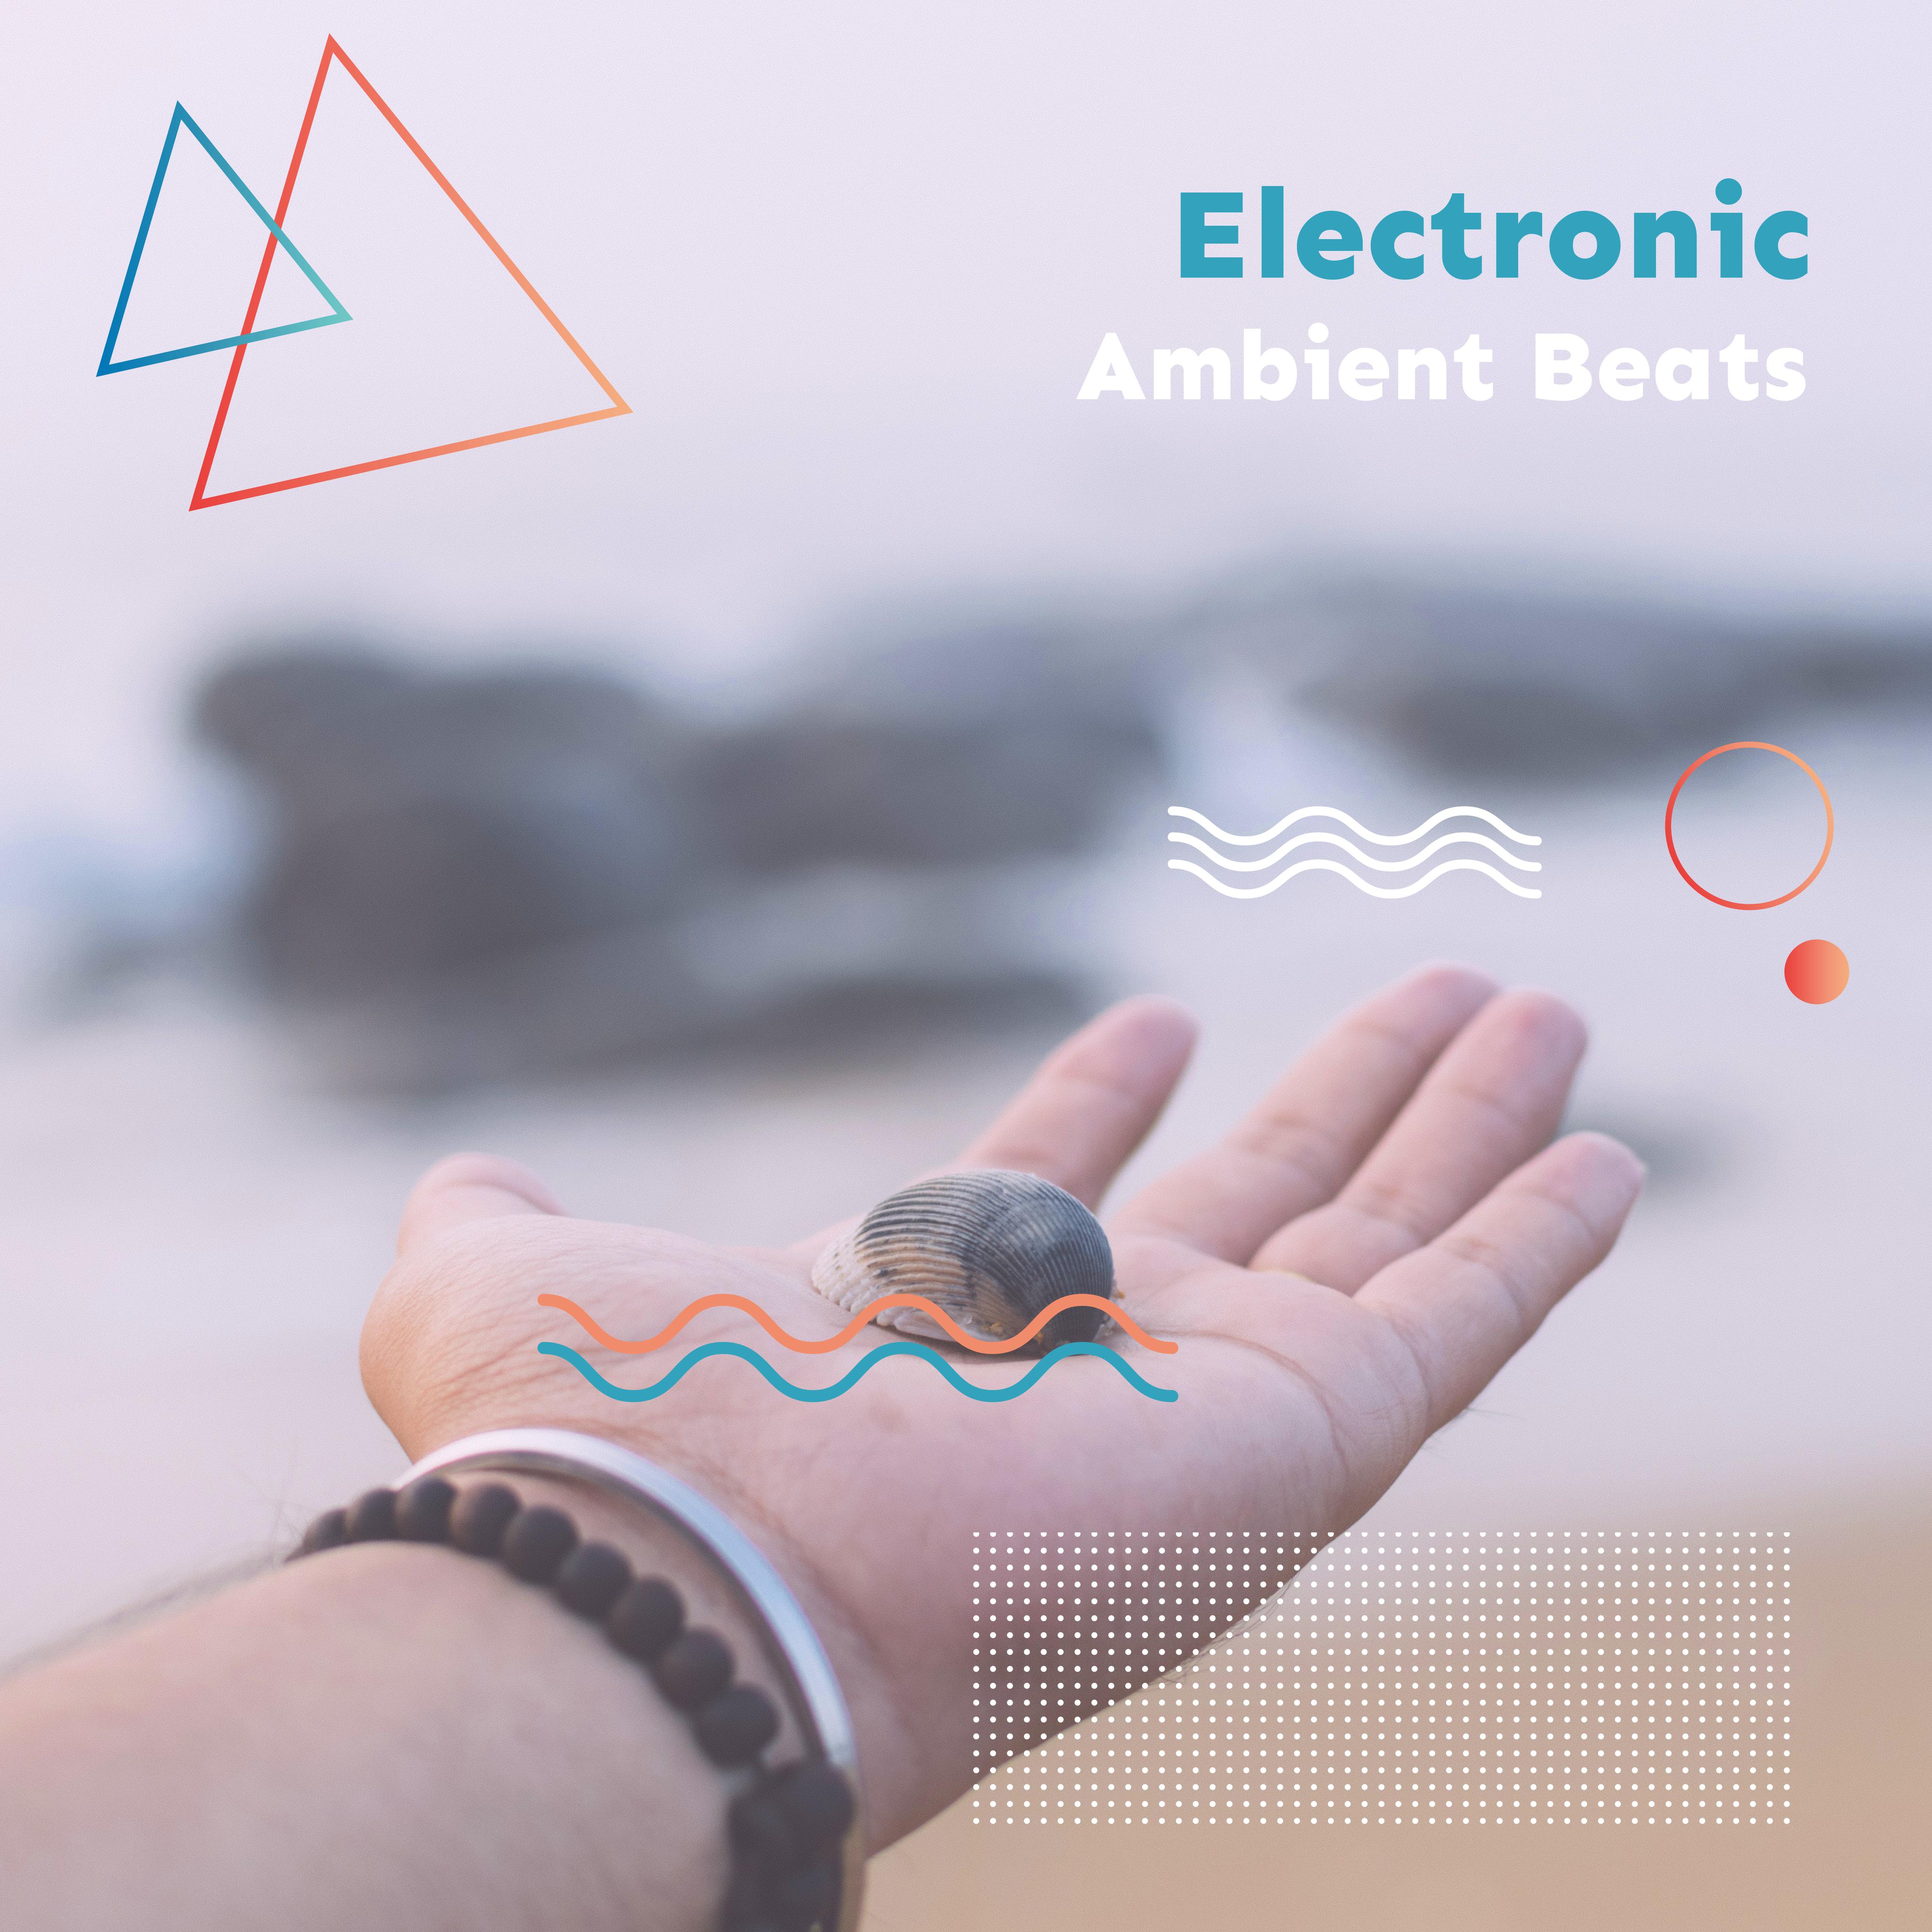 Electronic Ambient Beats - Electronic Rhythms in a Summer Mood for Relaxation, Chillout and Rest